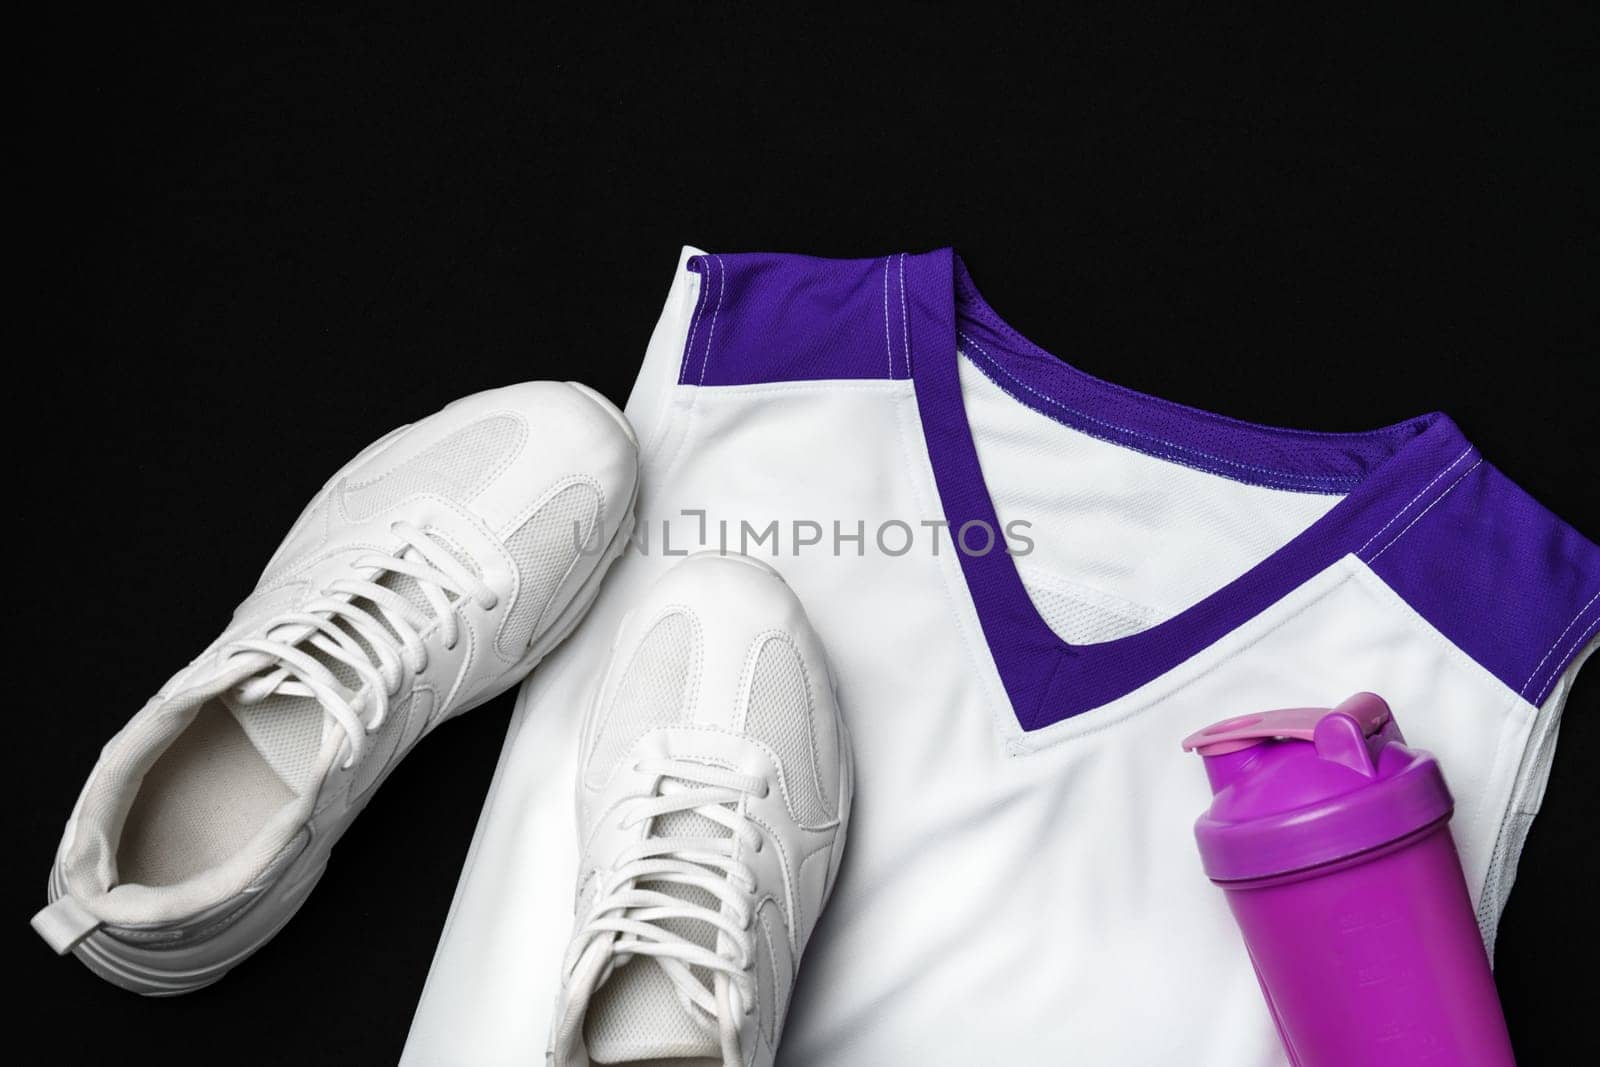 White Sneakers, Purple Accented Tank Top, and Shaker Bottle on a Black Background by Fabrikasimf